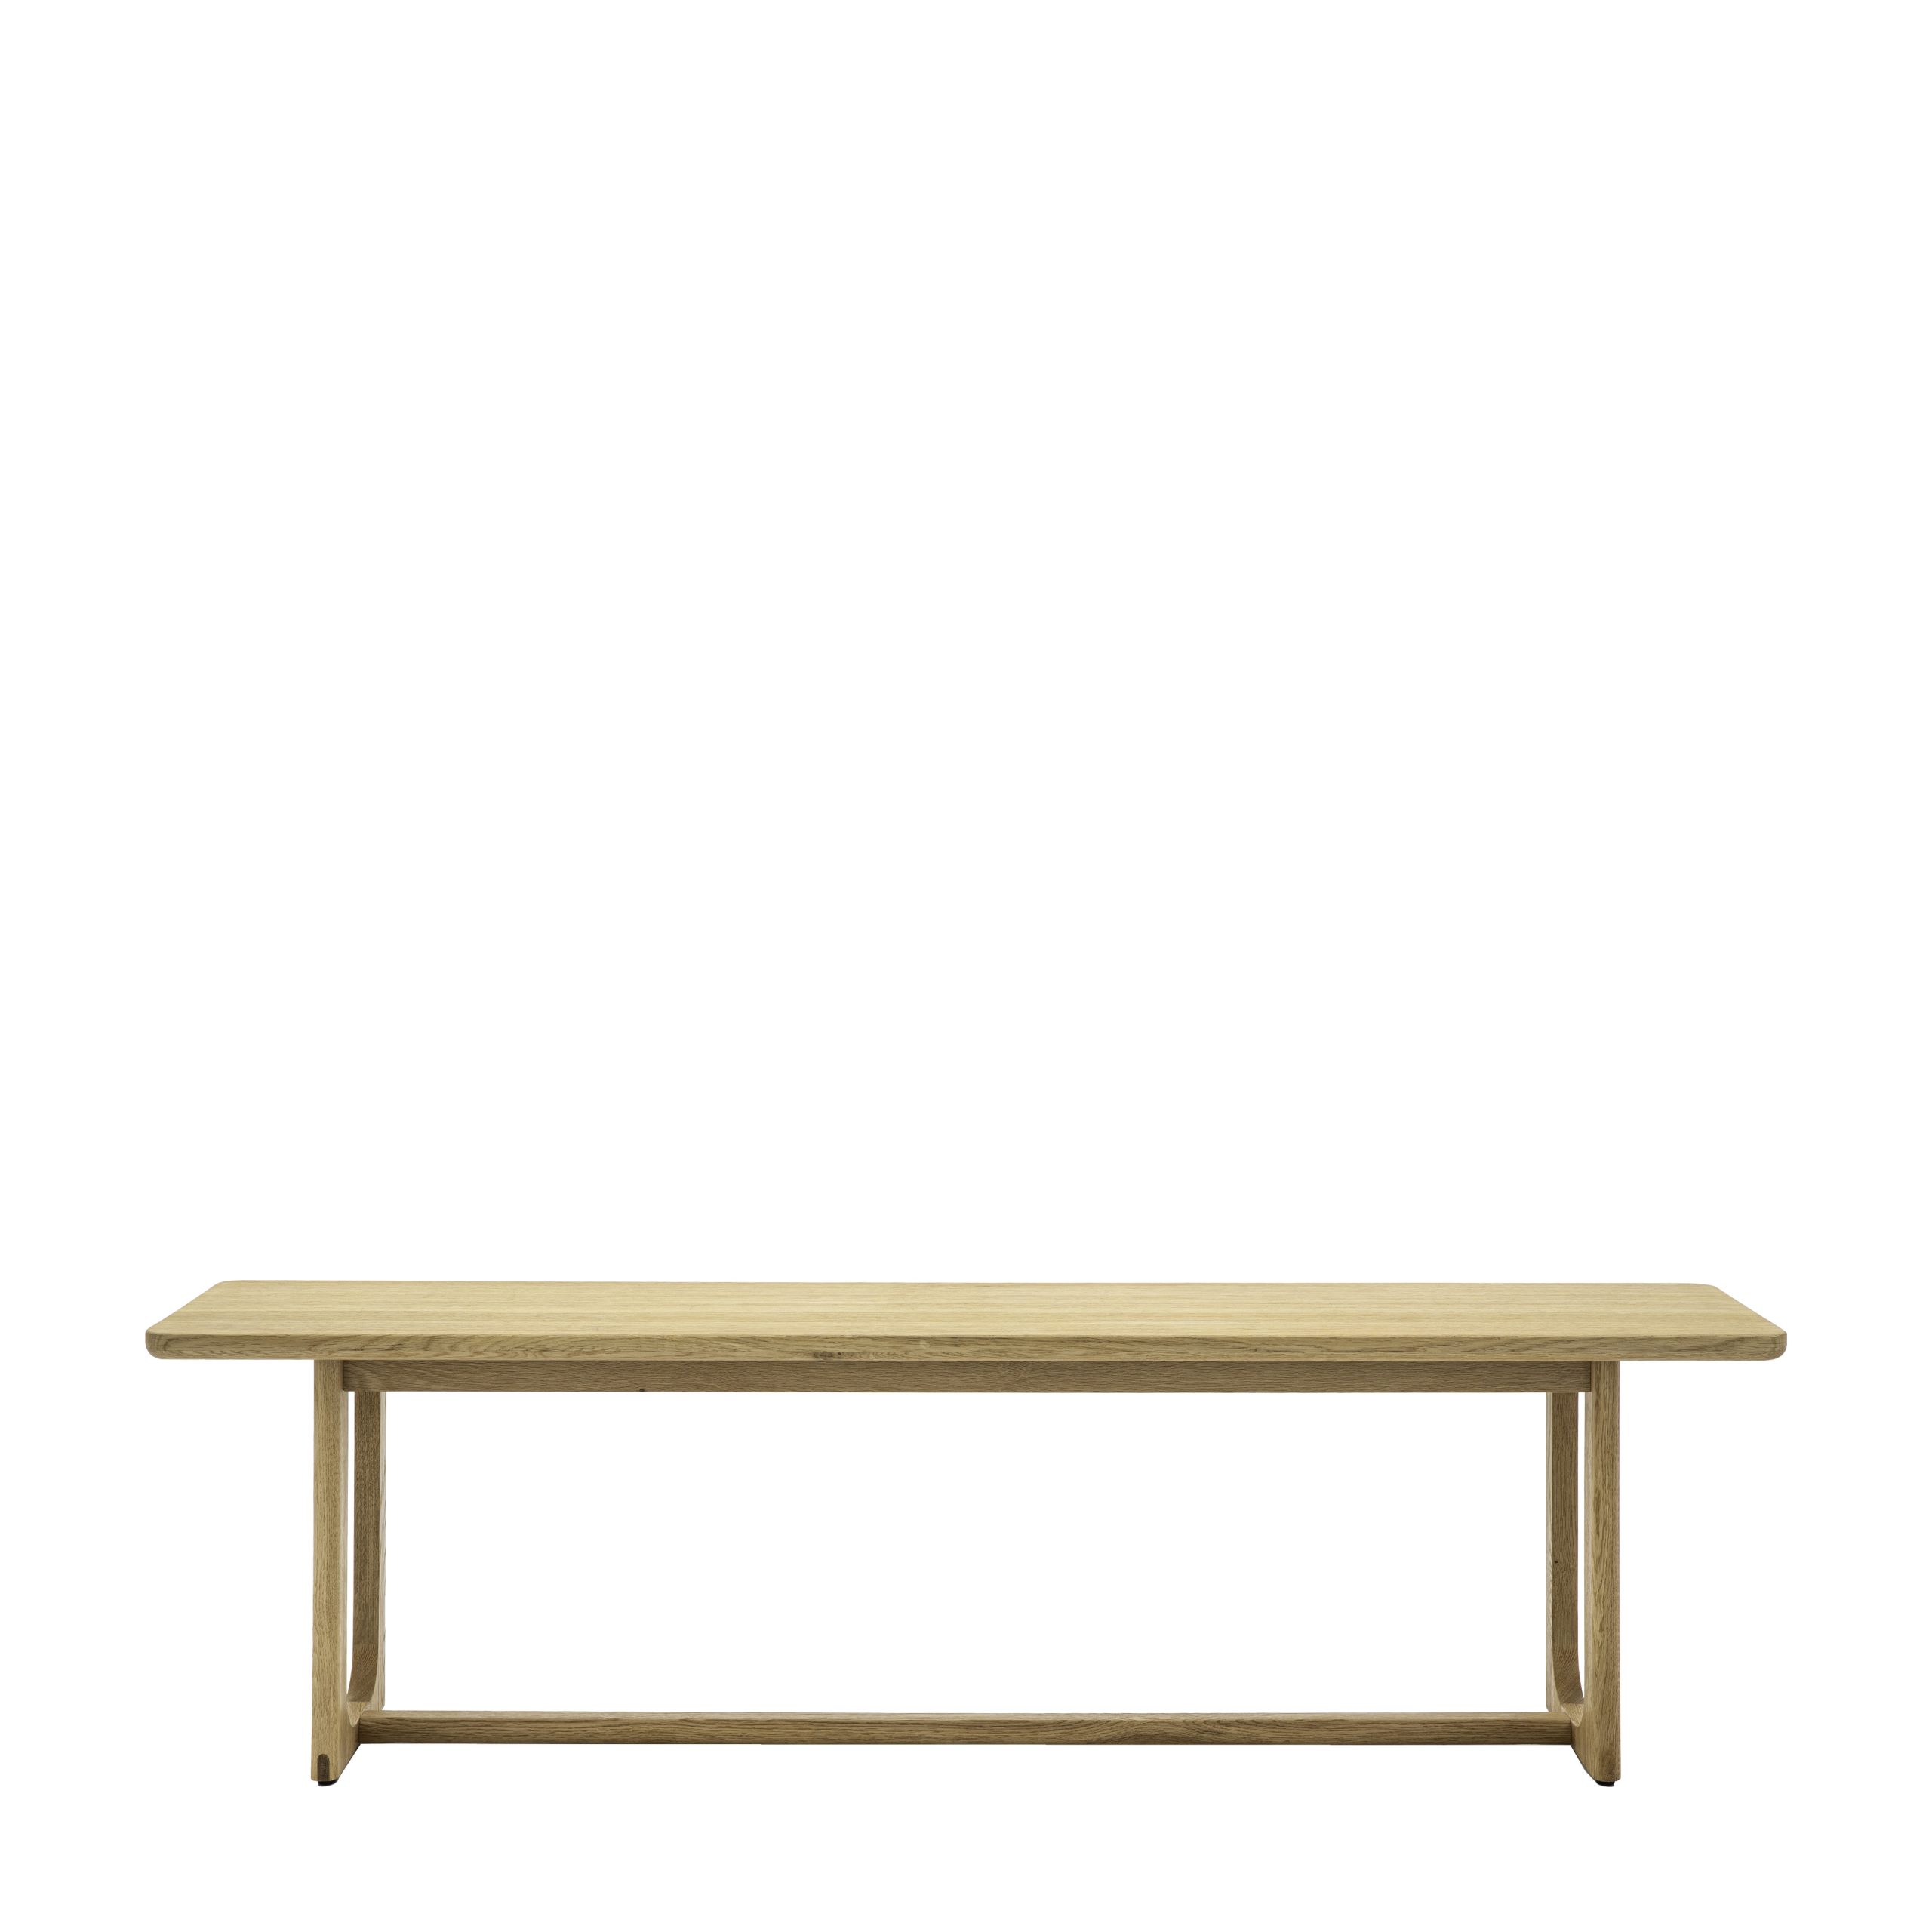 Gallery Direct Craft Dining Bench Natural